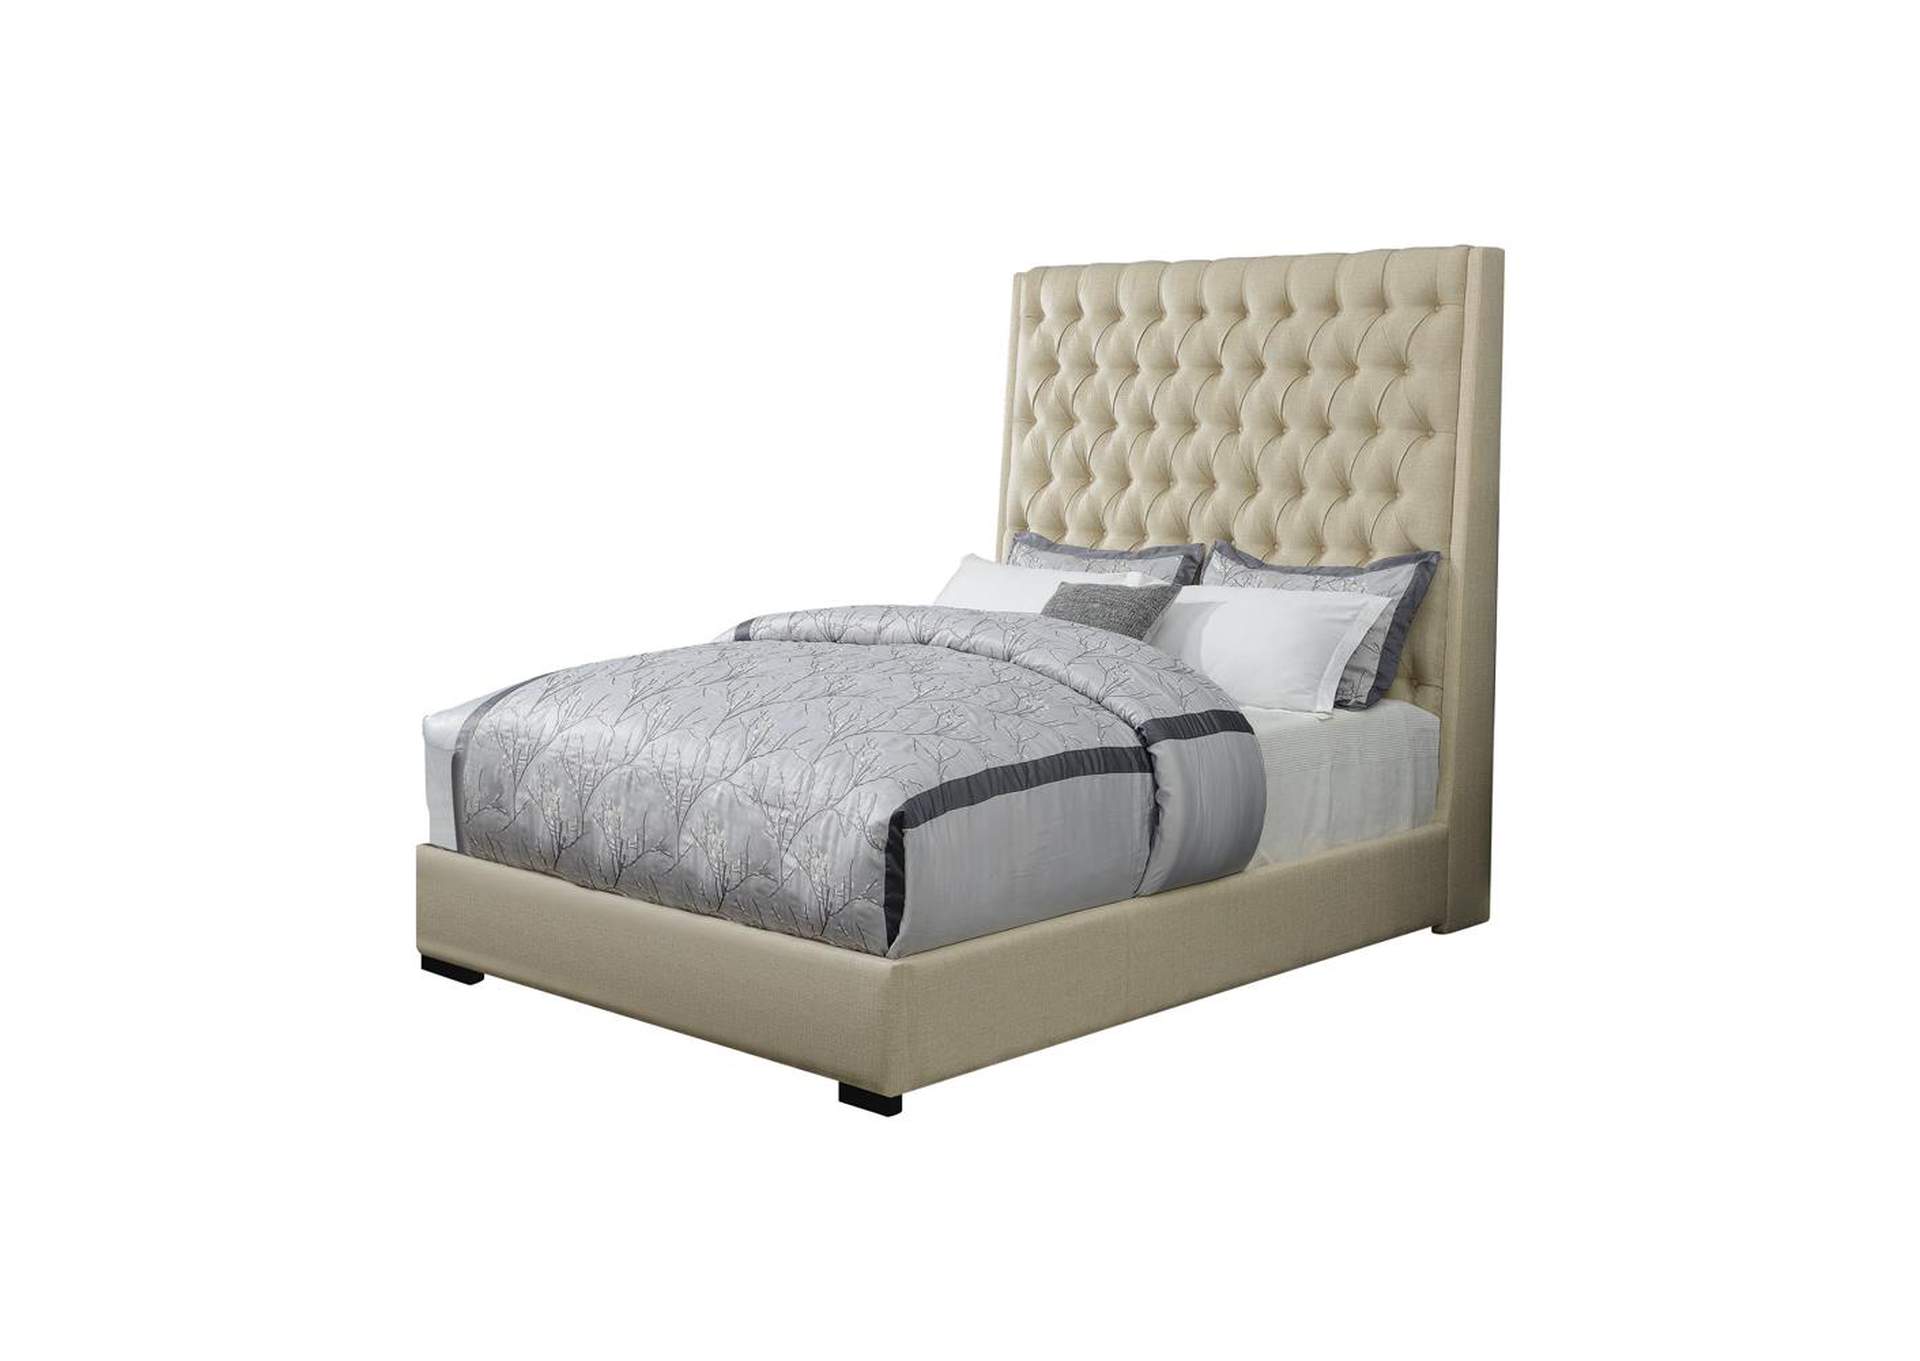 Camille Cream Upholstered Queen Bed,Coaster Furniture